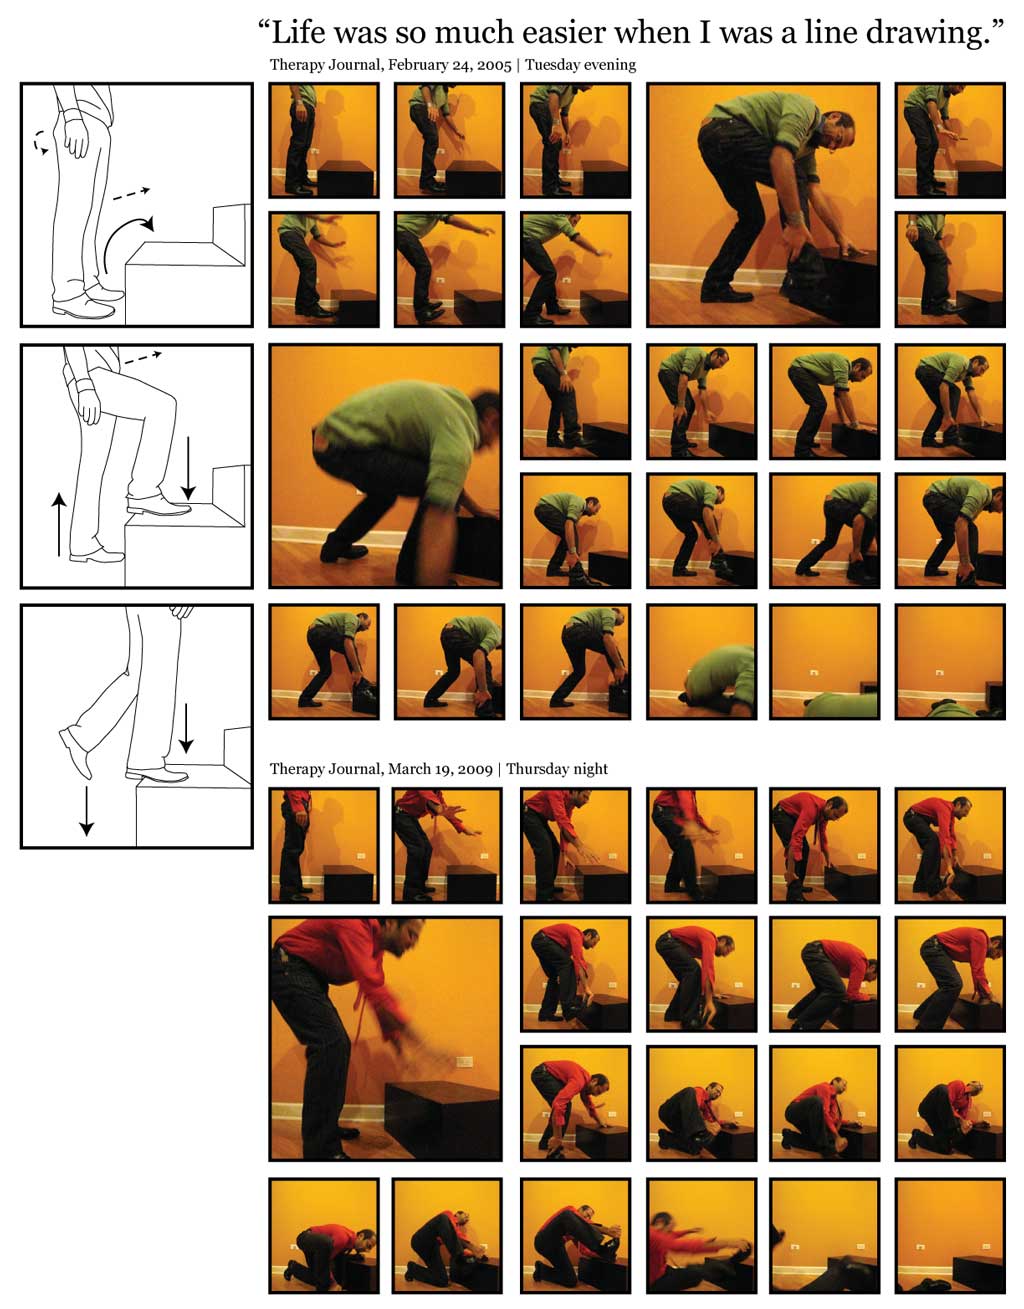 A play off of an instructional chart. On the left are three line drawing illustrations showing how to walk up a single step. On the right are a series of snapshot photos showing myself as someone who's struggling to walk up a single step, eventually falling over to the ground in frustration.